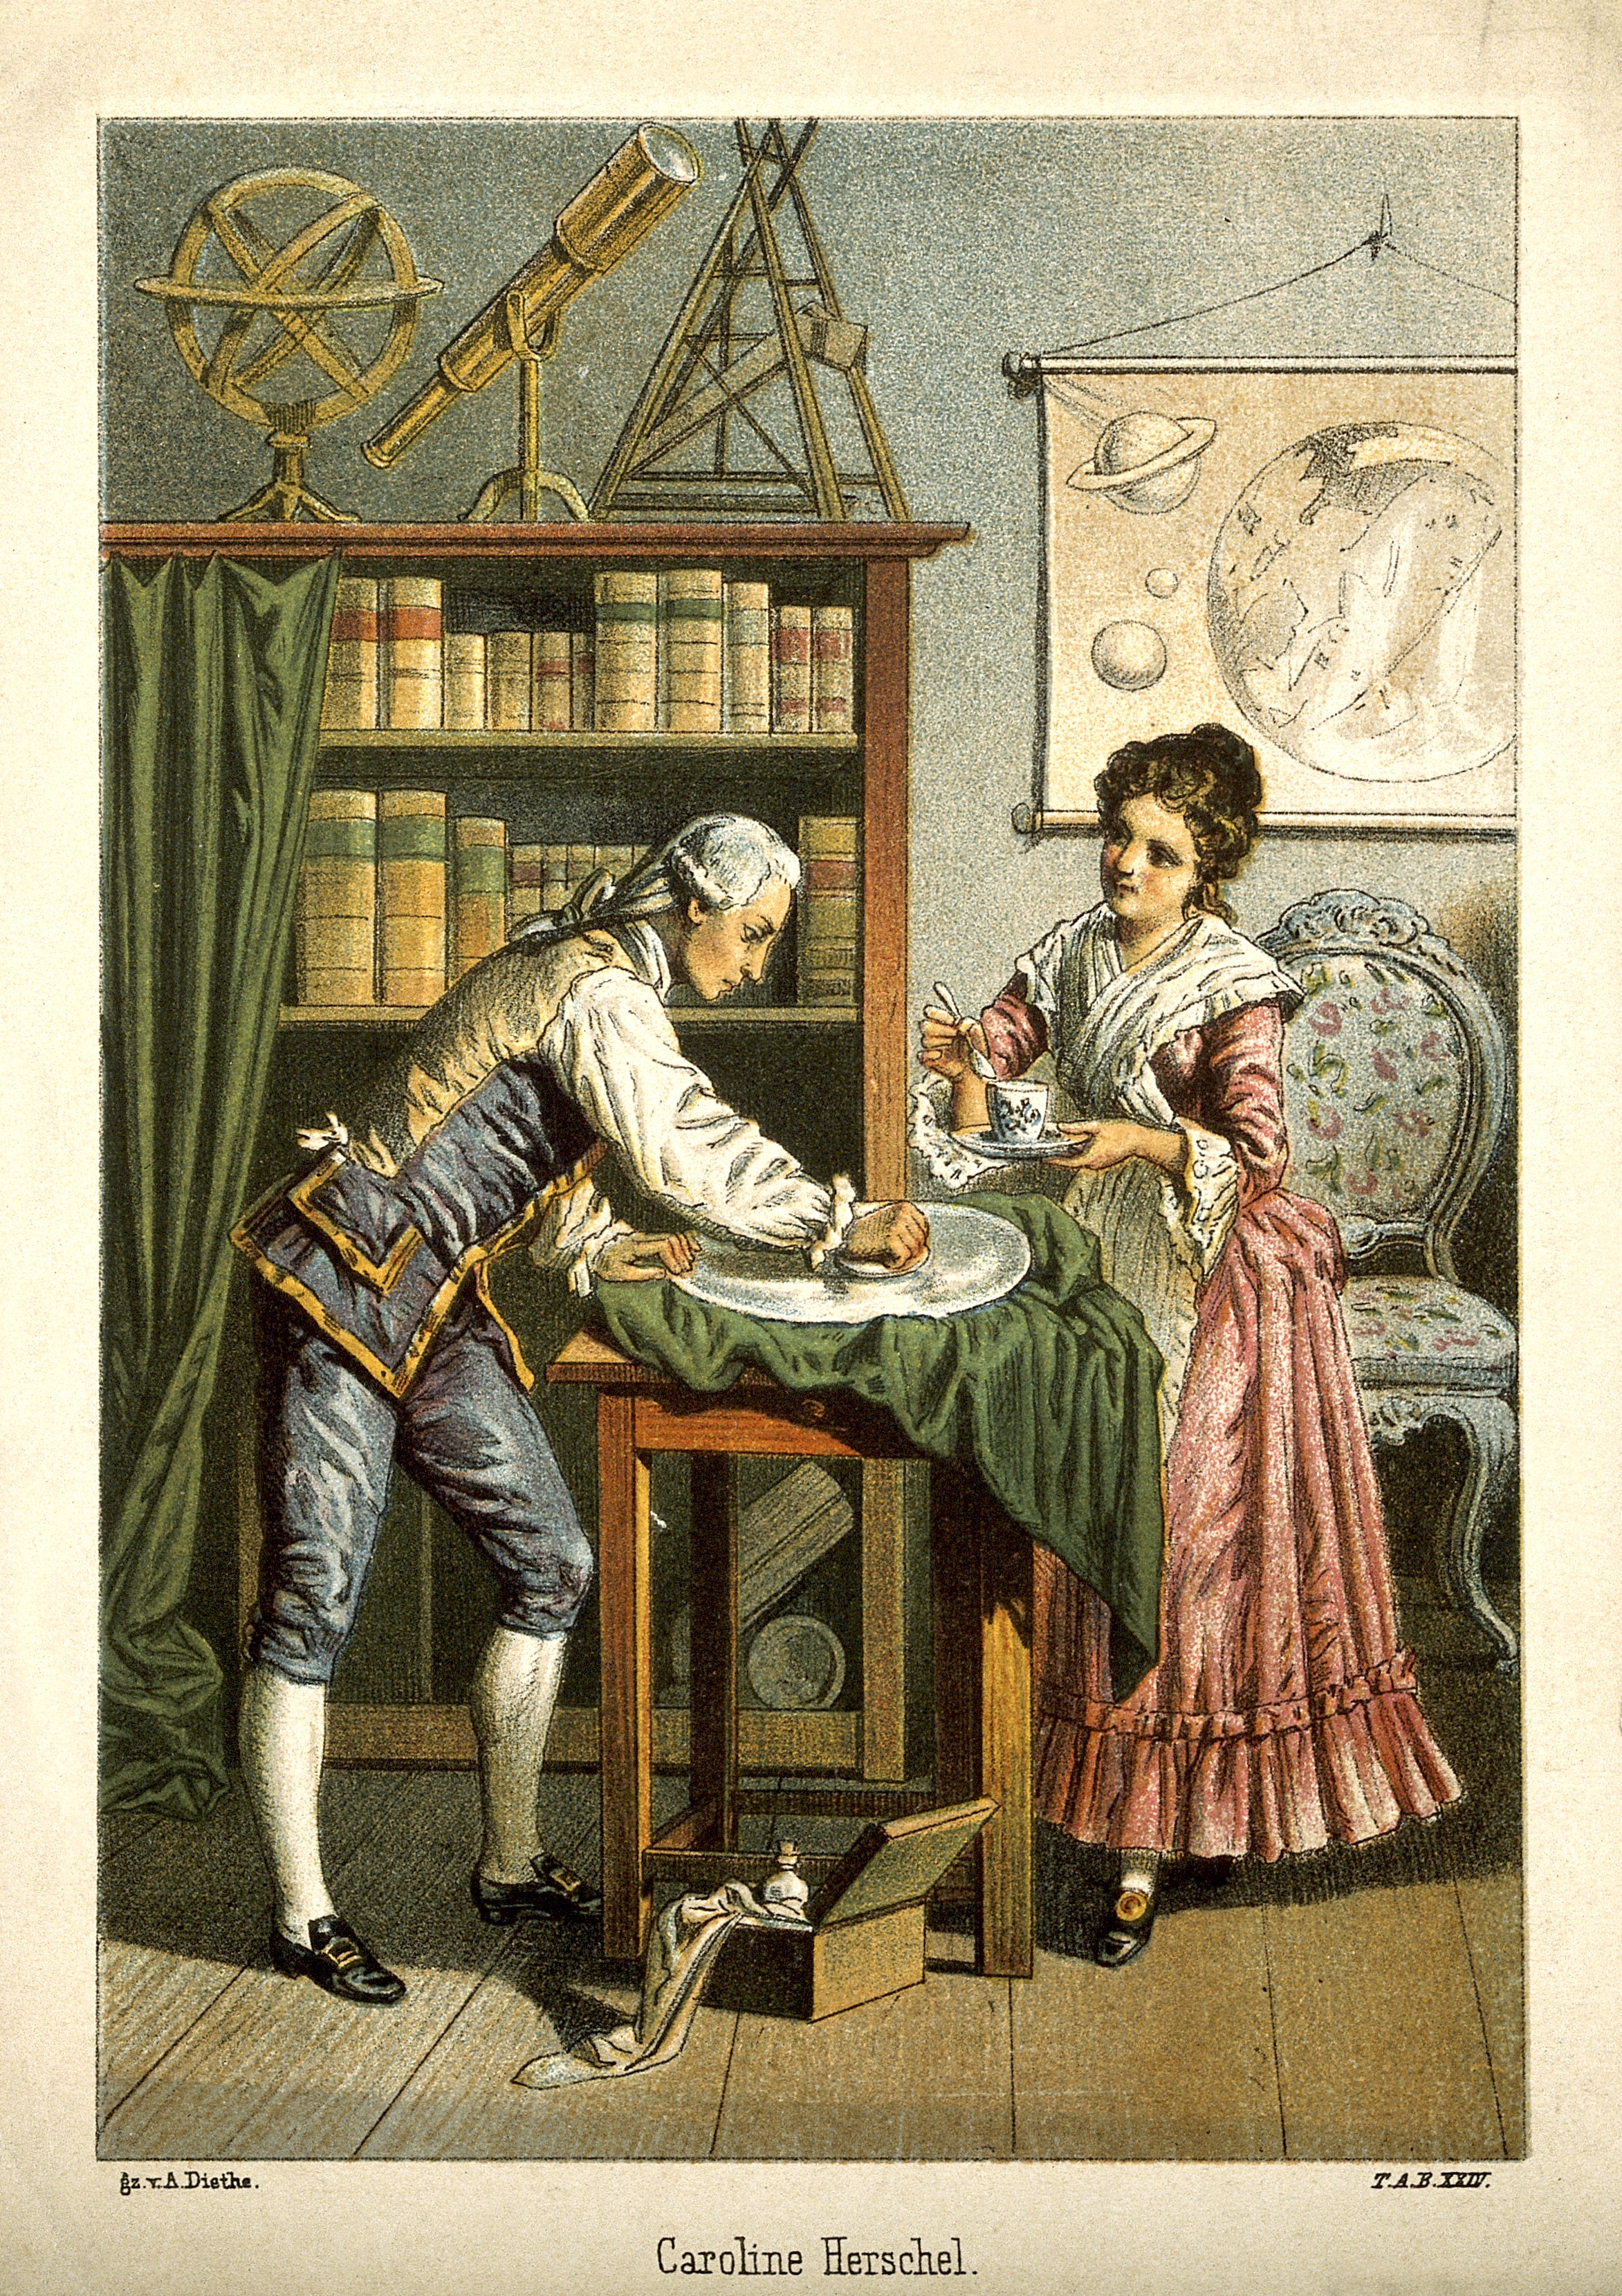 V0002731 Sir William Herschel and Caroline Herschel. Coloured lithogr Credit: Wellcome Library, London. Wellcome Images images@wellcome.ac.uk http://wellcomeimages.org Sir William Herschel and Caroline Herschel. Coloured lithograph by A. Diethe. Published: - Copyrighted work available under Creative Commons Attribution only licence CC BY 4.0 http://creativecommons.org/licenses/by/4.0/